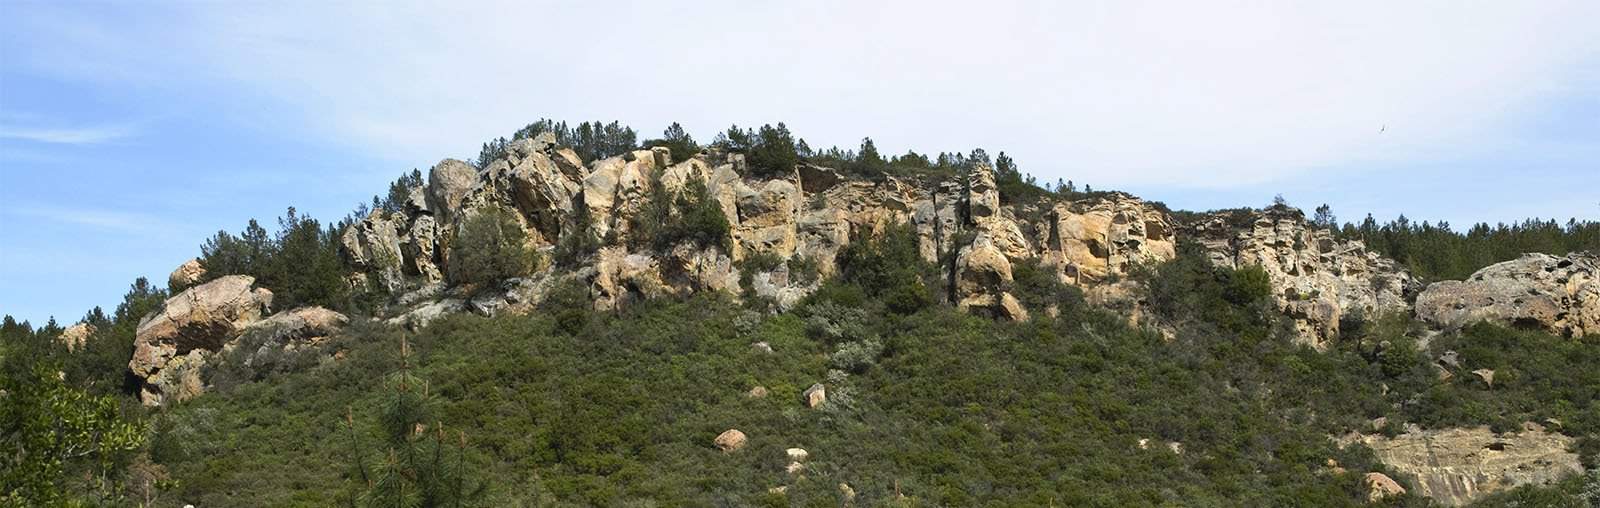 cliffs in the Knobcone Area at Curry Canyon Ranch